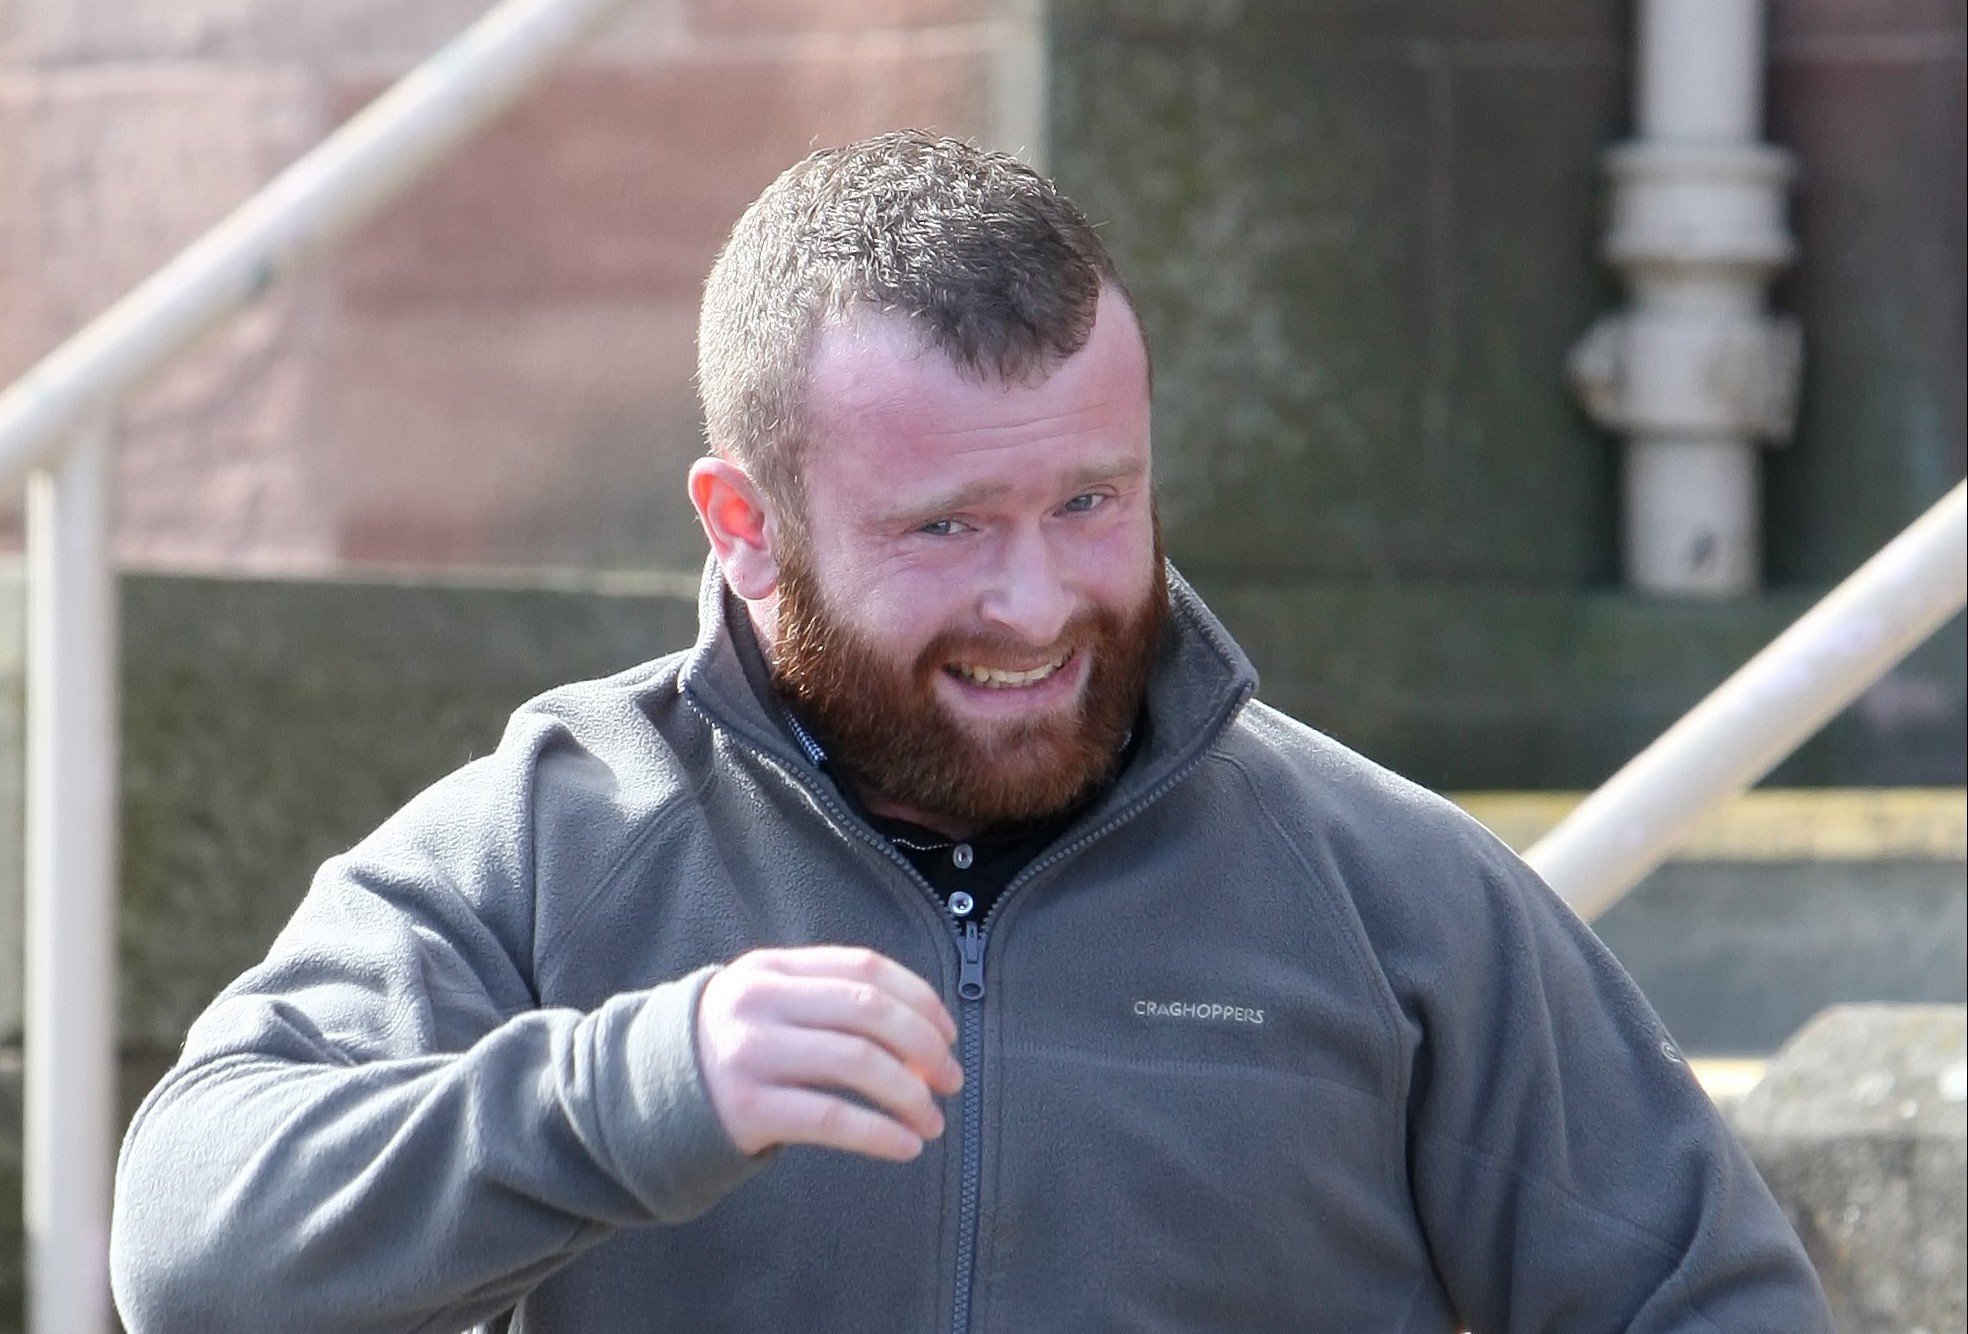 Liam Calder leaving Inverness Sheriff Court, where he appeared on a charge relating to the posting online of racially offensive material.